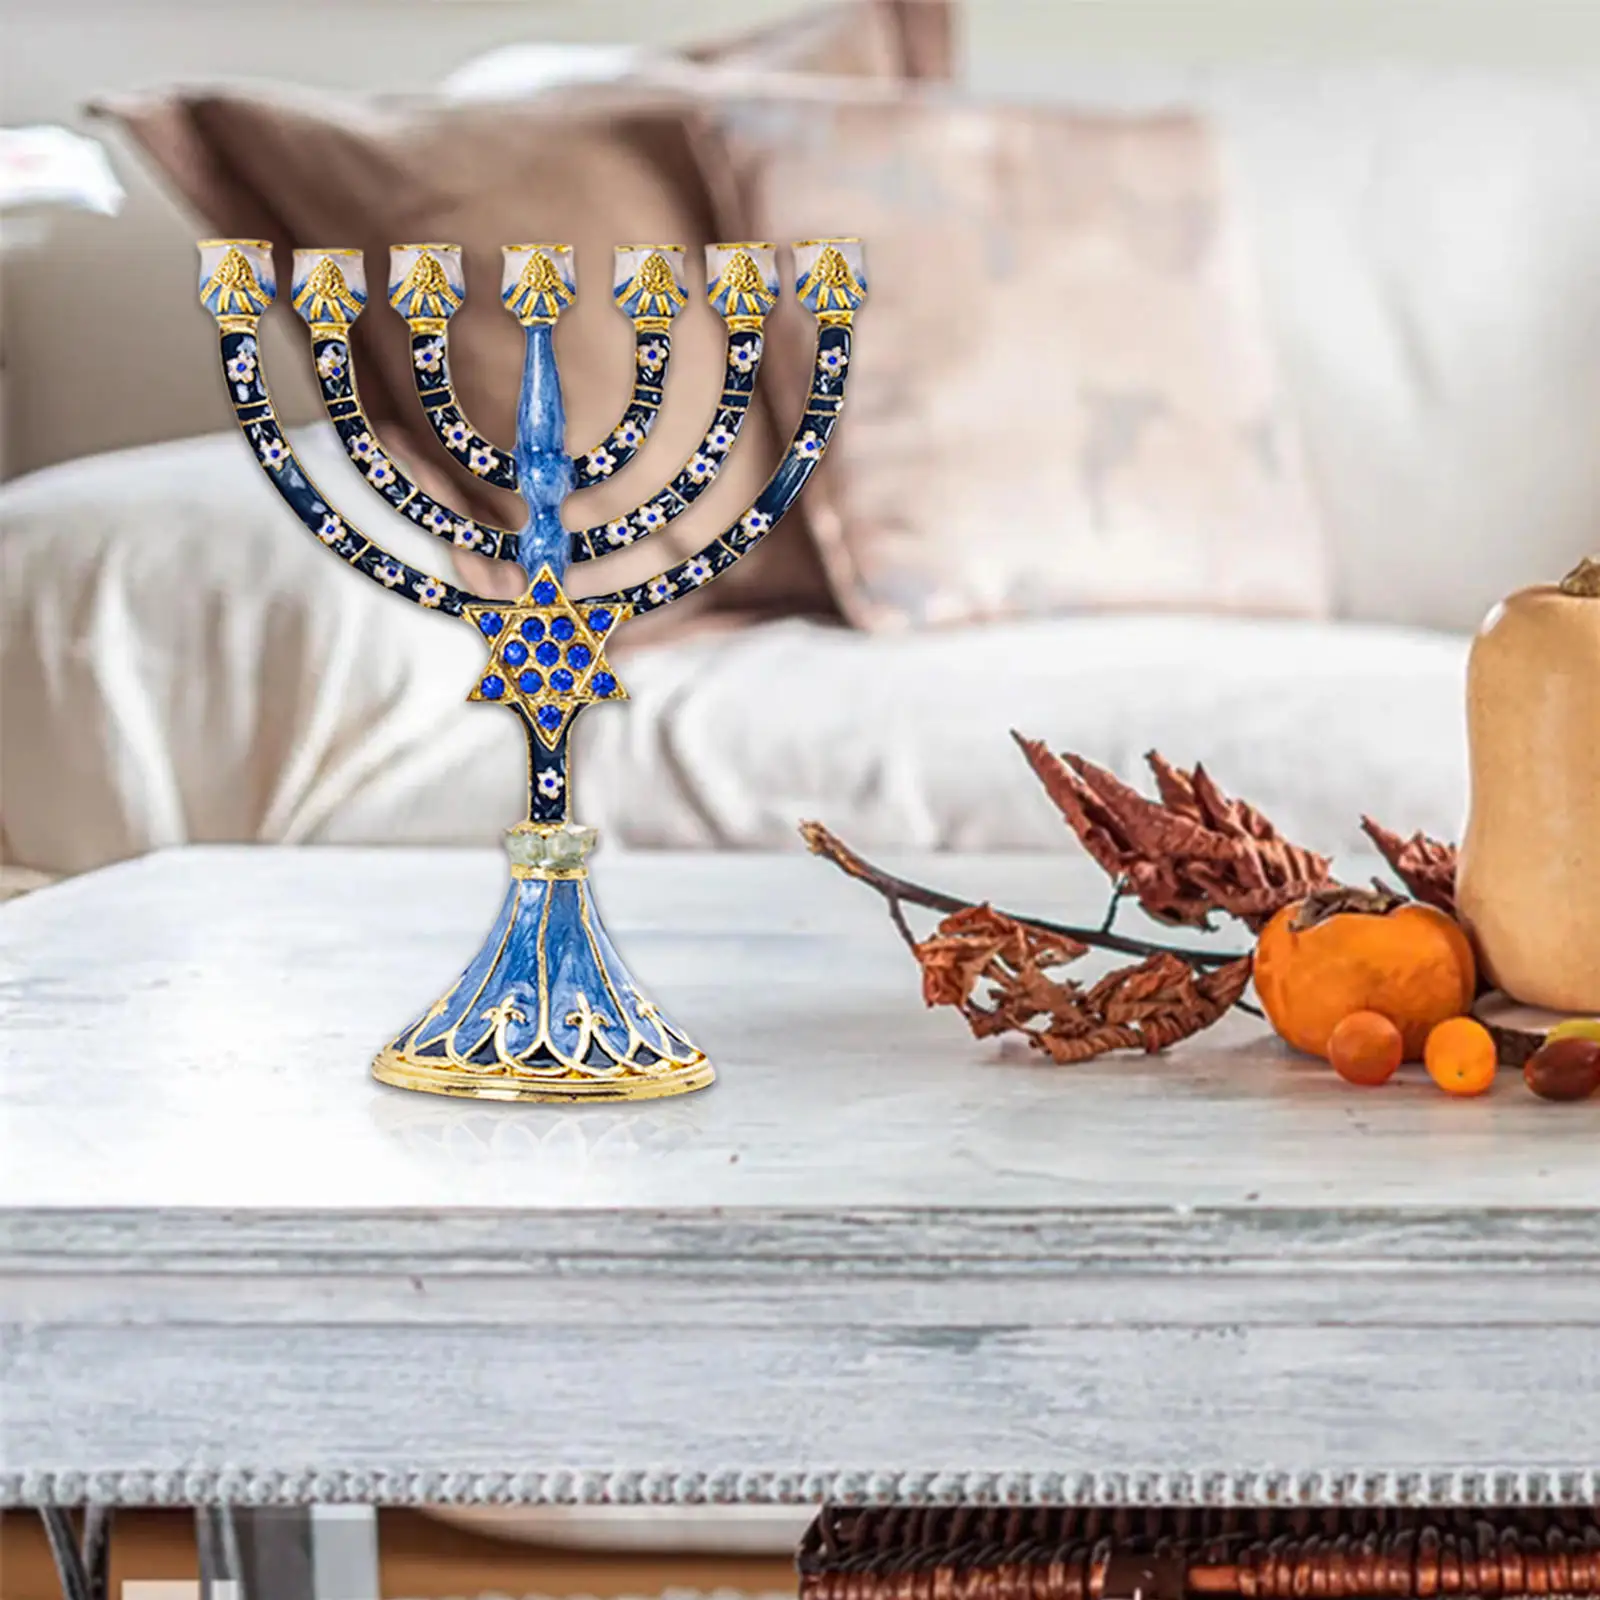 Hand Painted Hanukkah Enamel Menorah with Jeweled Accents Bejeweled Candelabra Candle Holder